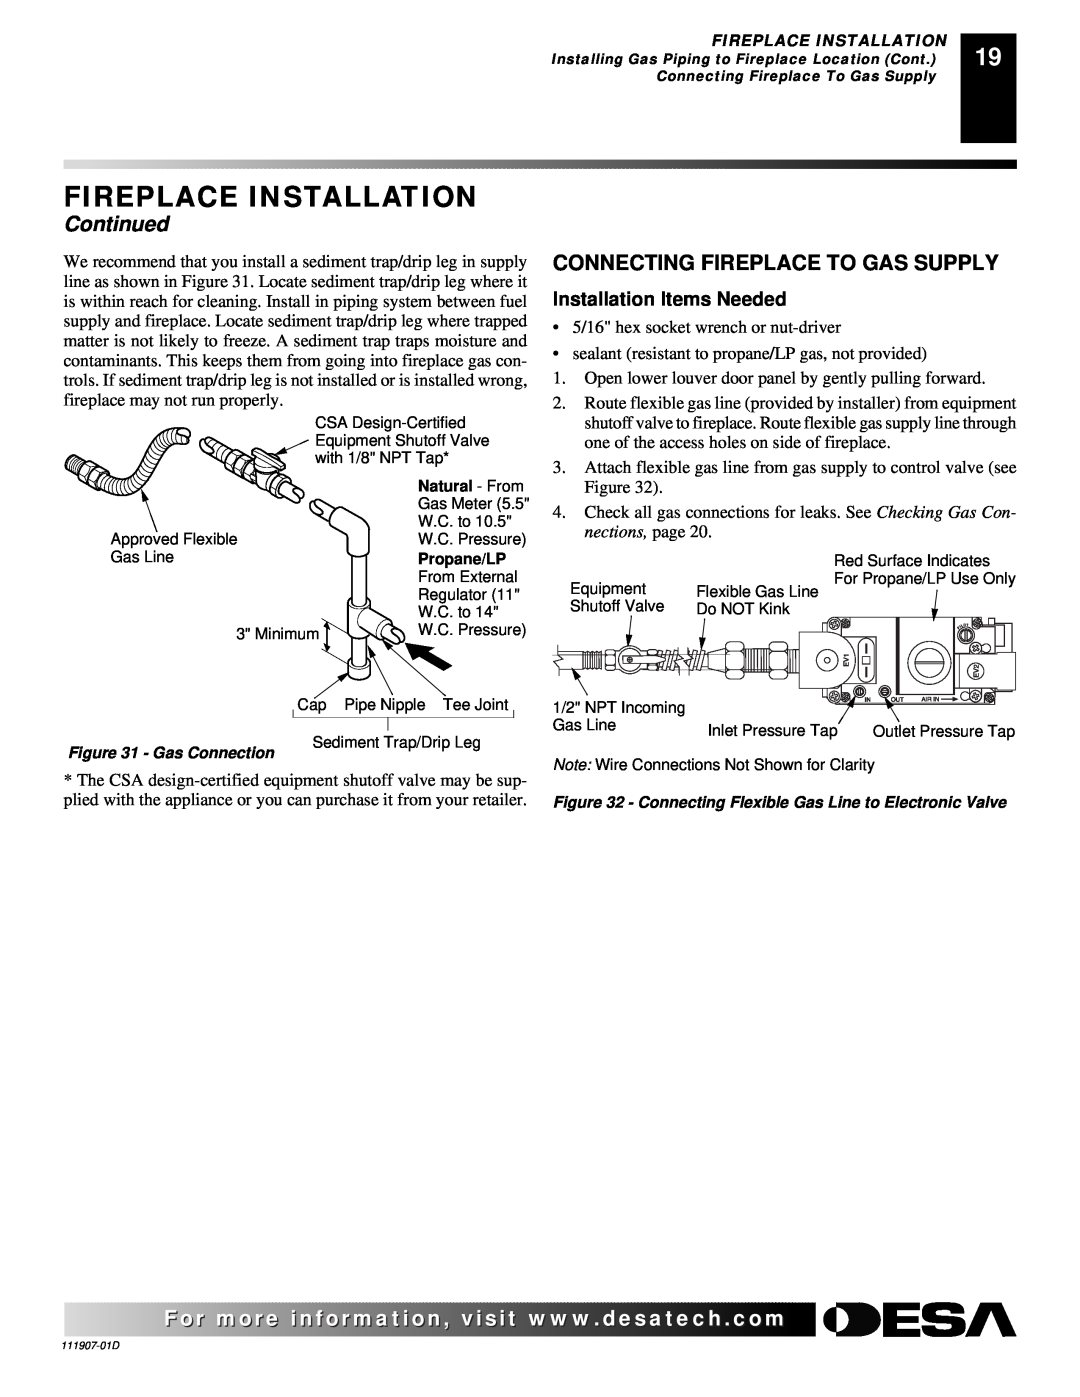 Desa V42EP-A, VV42ENB(1), VV42EPB(1), V42EN-A Fireplace Installation, Continued, Installation Items Needed, nections, page 